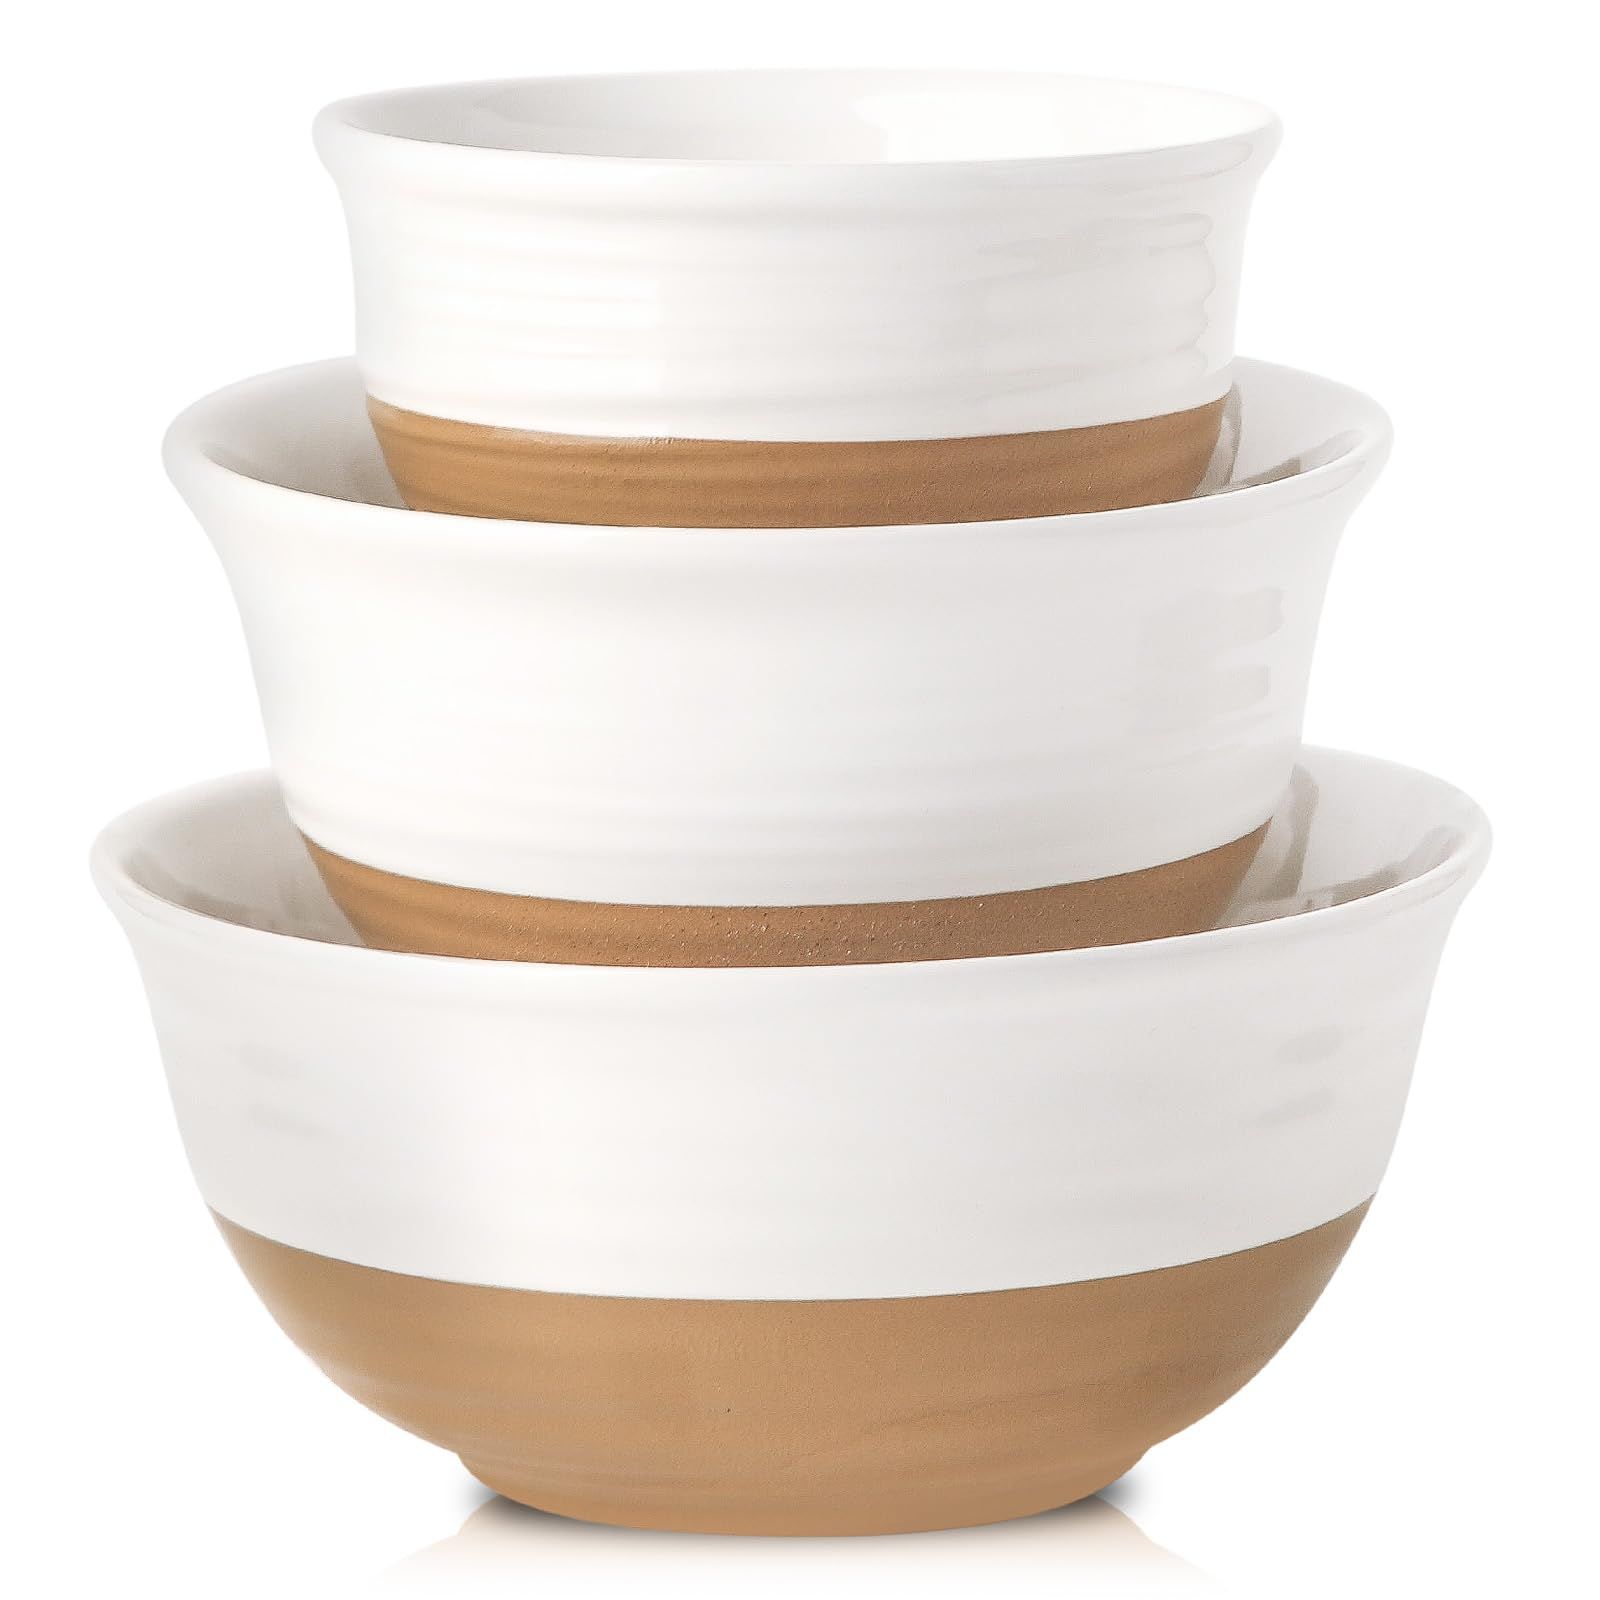 Hasense Salad Mixing Bowls, Large Serving Bowls, 1.5/1.0/0.5 Qt White Bowls Set, Serving Dishes for Entertaining, Ideal for Soup Pasta Prepping Baking, Dishwasher Microwave Safe, Set of 3 | Amazon (US)